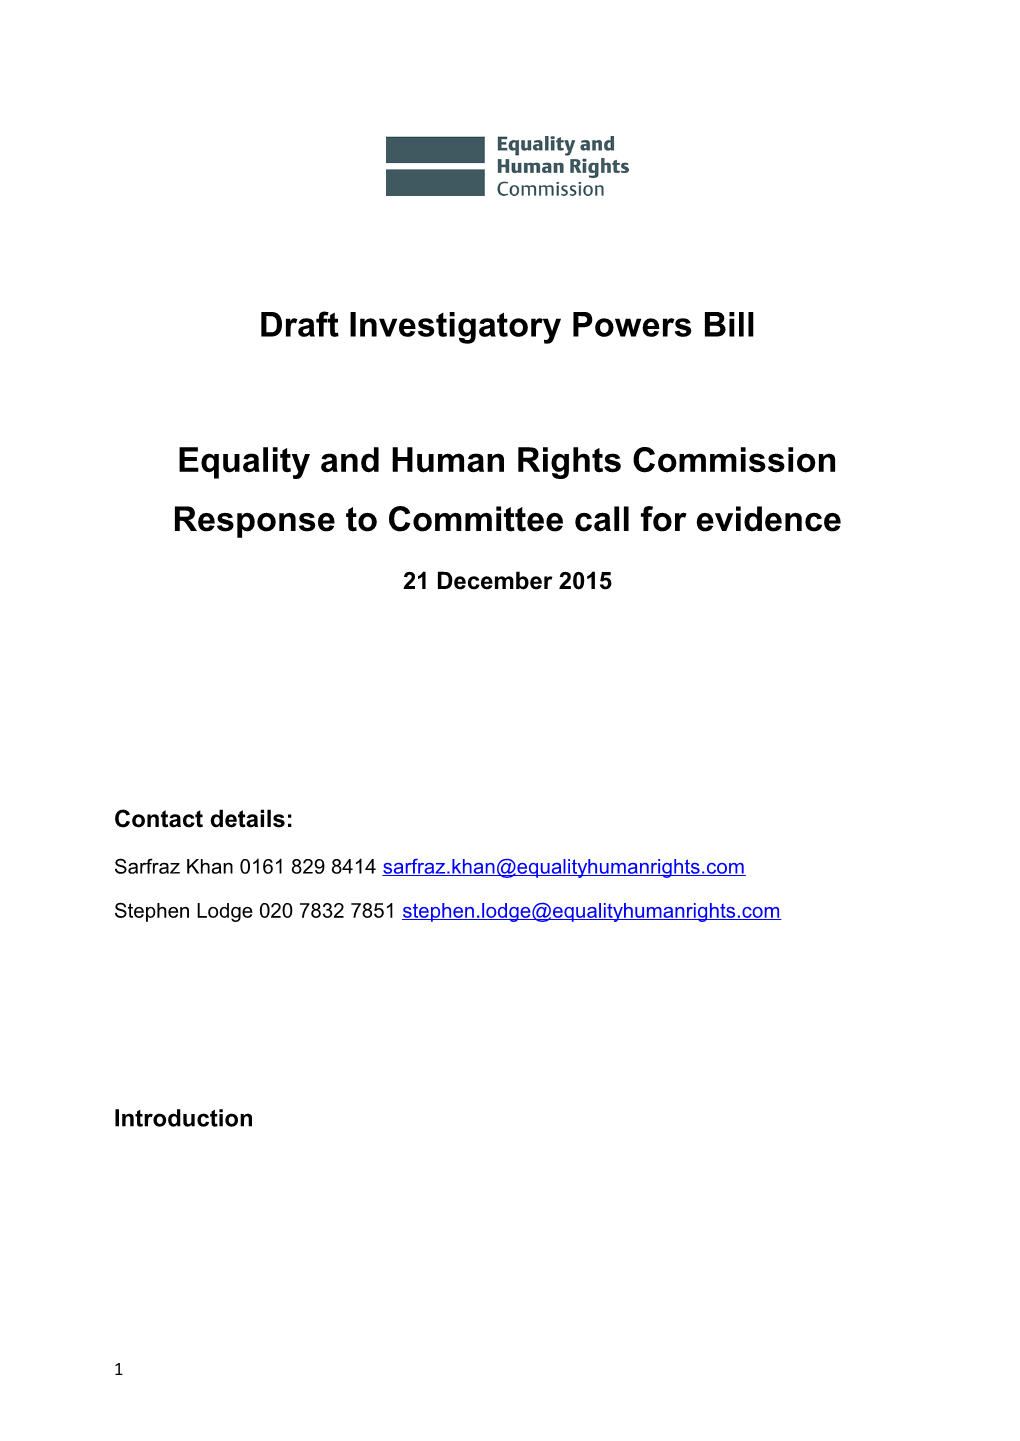 Equality and Human Rights Commission Response to Committee Call for Evidence